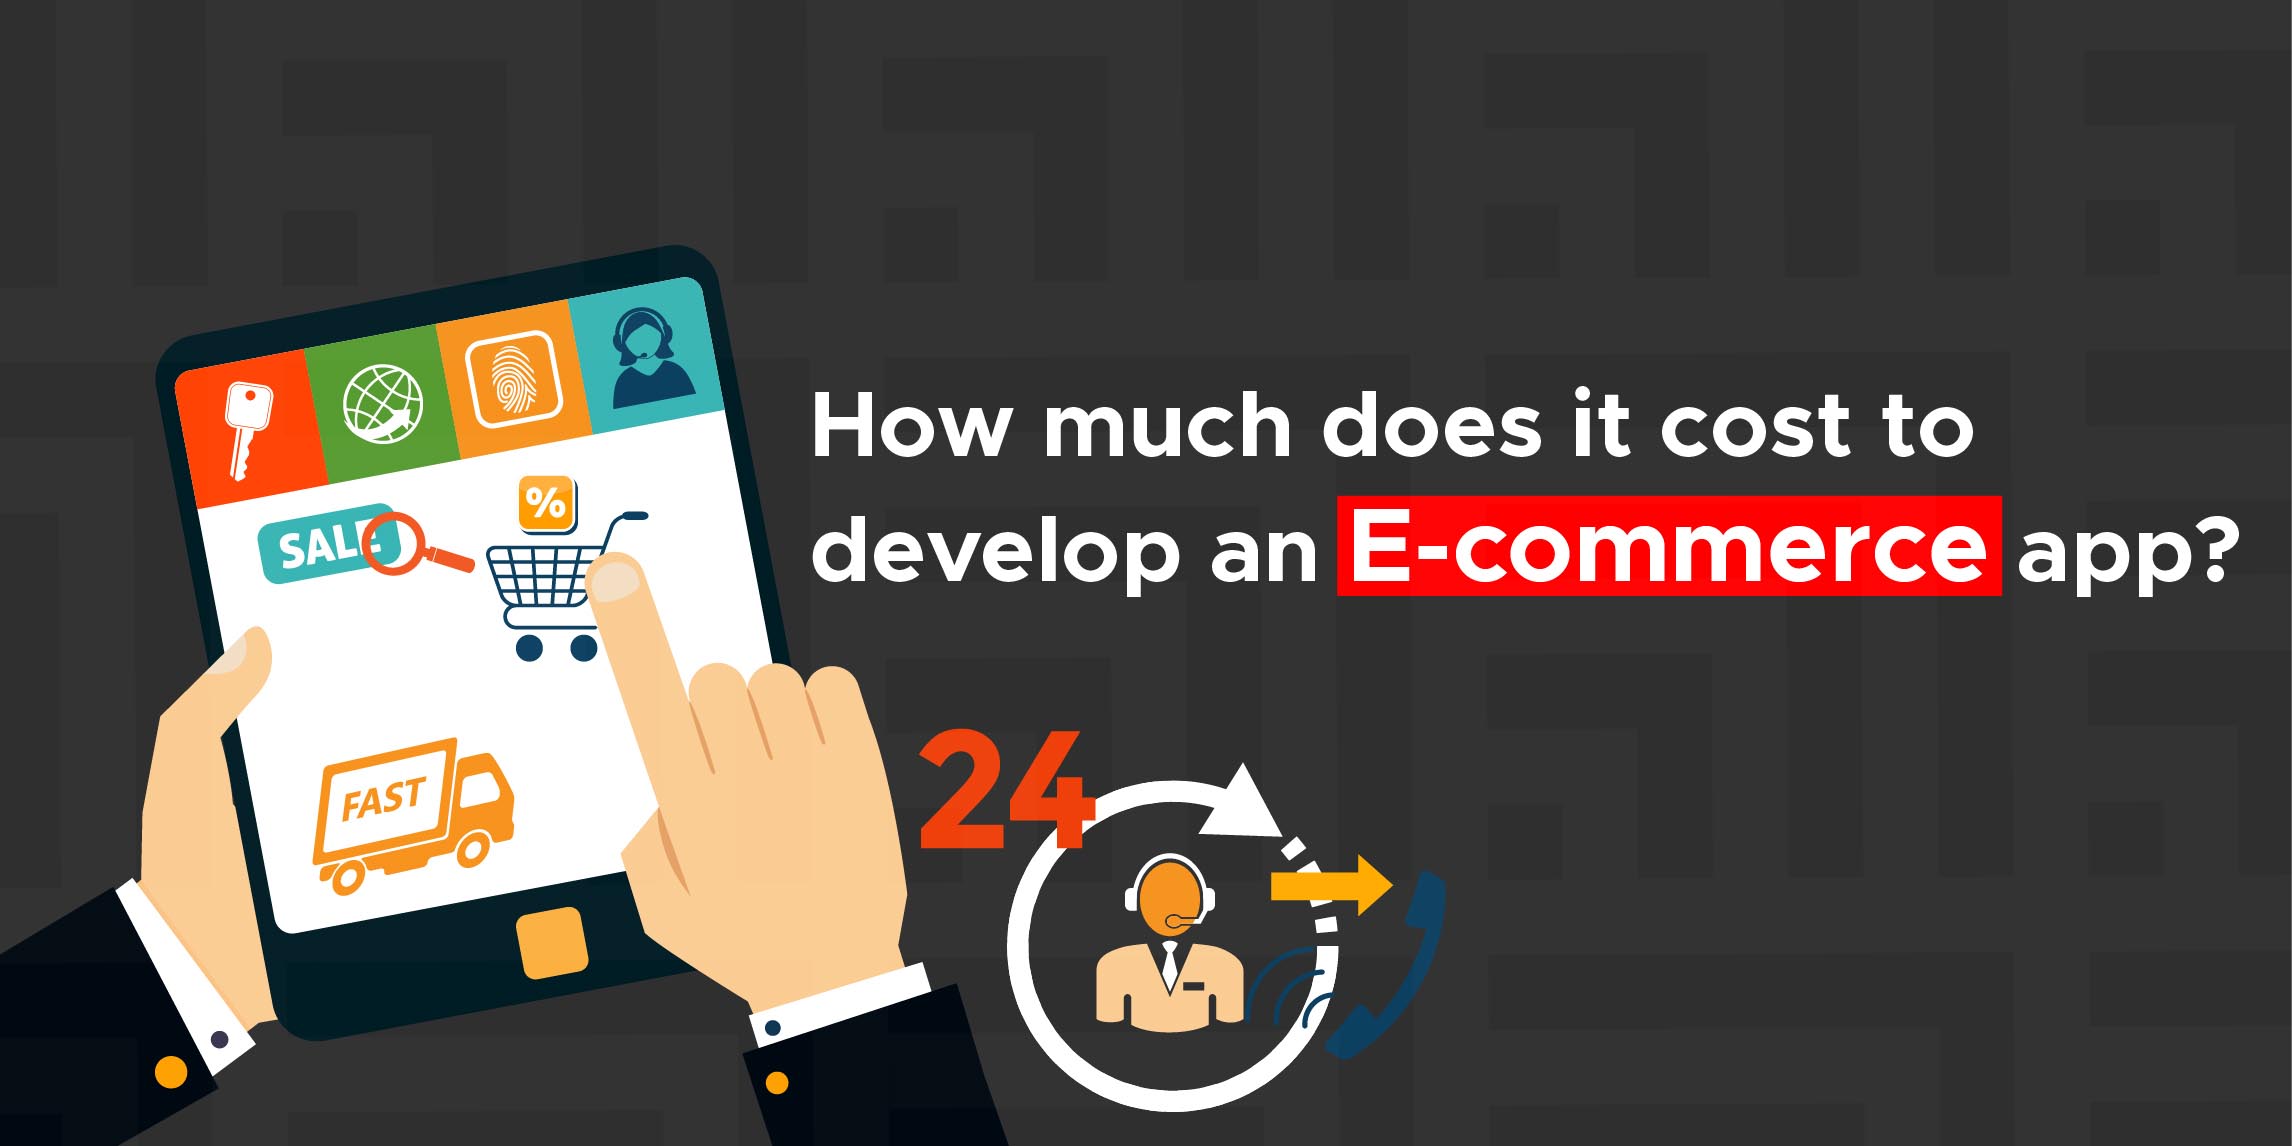 How much does it cost to develop an E-commerce app